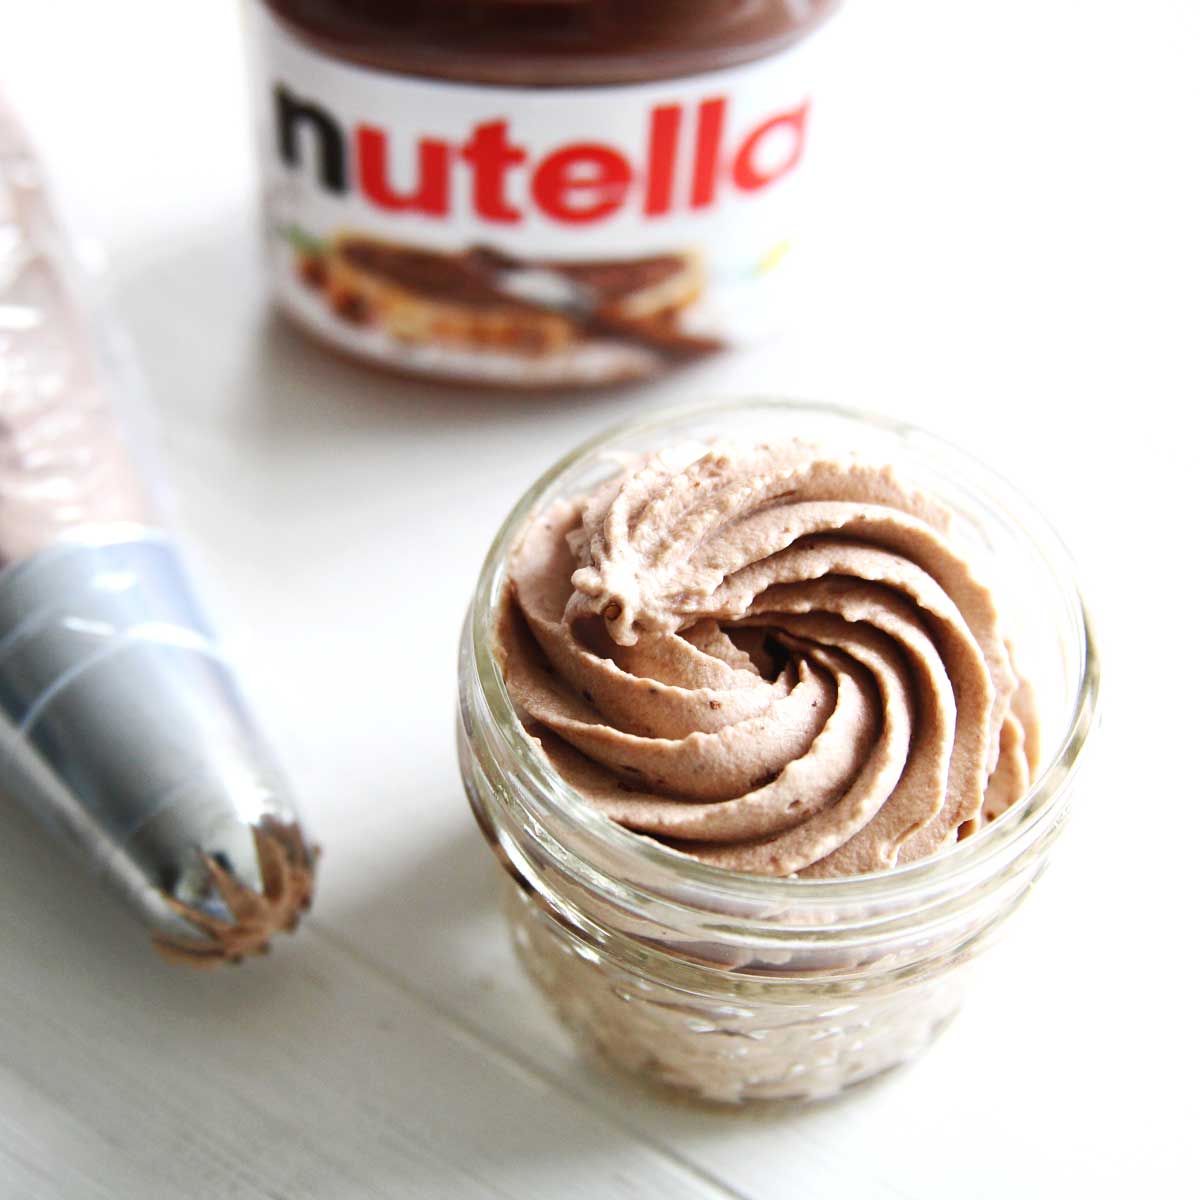 How to Make Nutella Chocolate Whipped Cream (Chantilly Cream) - Strawberry Whipped Cream